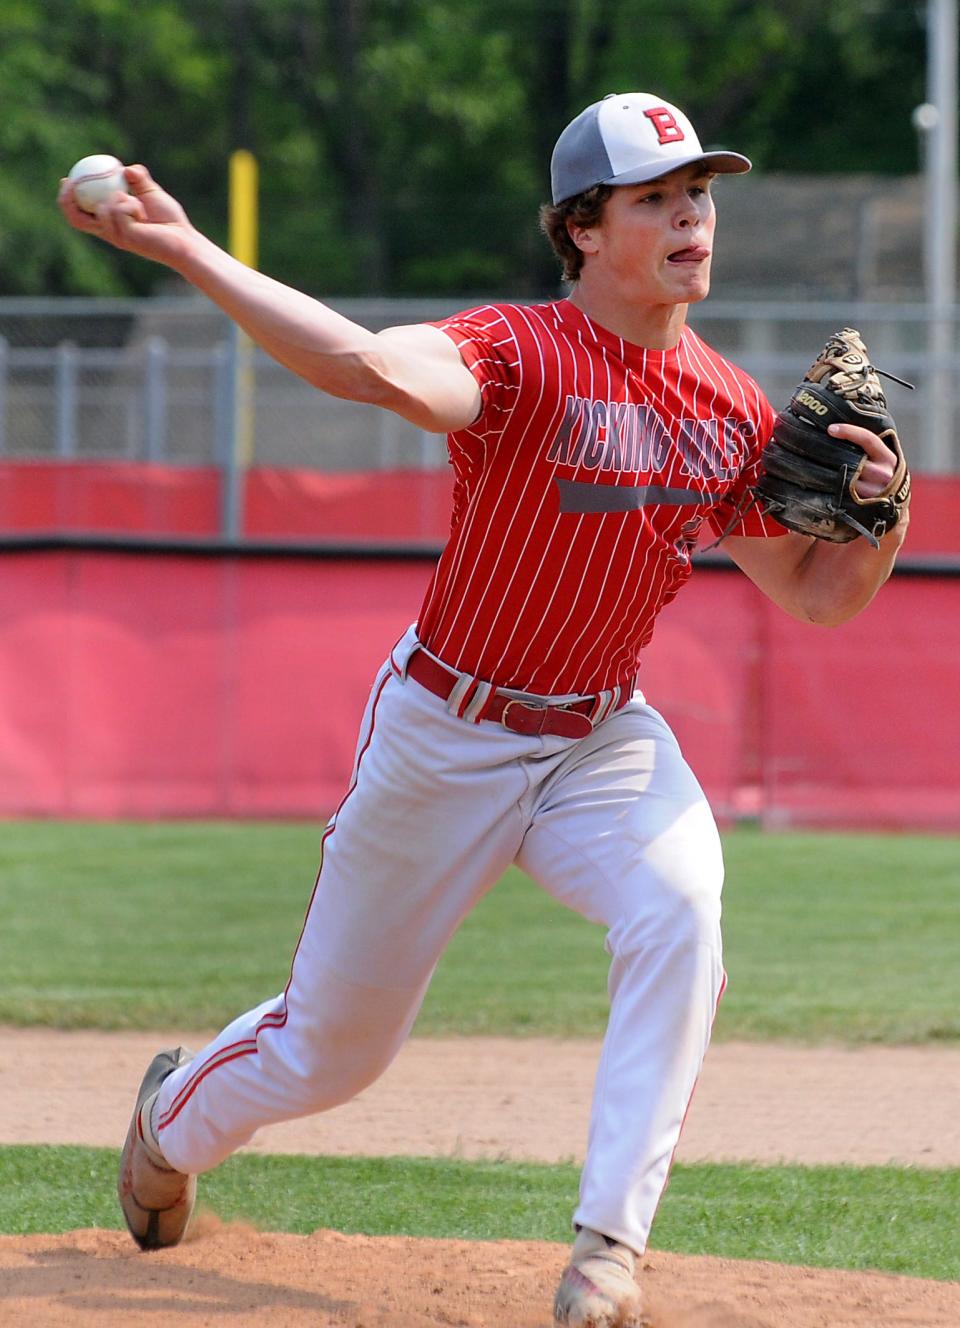 Tommy Huss of Bedford throws a pitch against Dexter Monday.